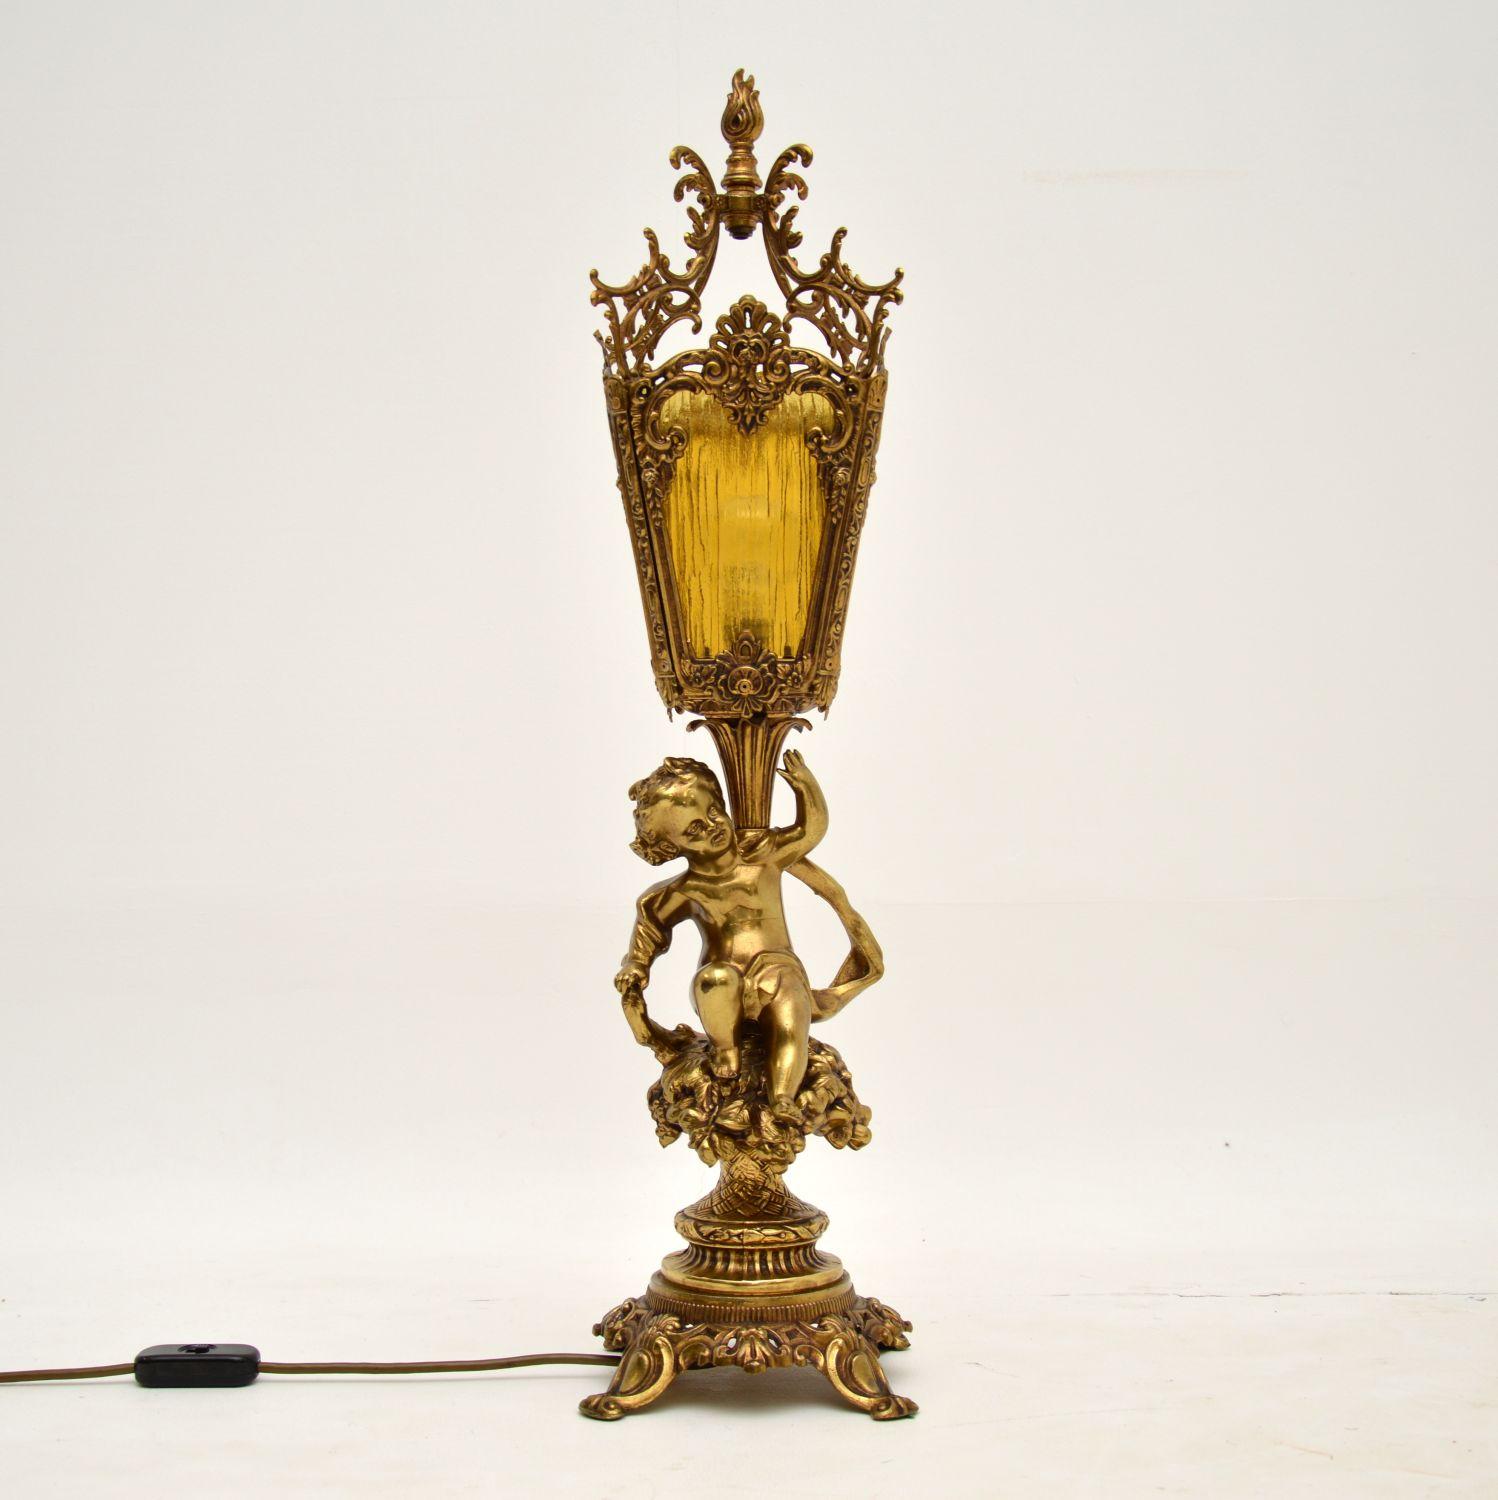 A large stunning antique table lamp in gilt metal, with original glass shade inserts. We believe it’s French & dates from around the 1930-50’s period.

It is of absolutely wonderful quality, with beautiful details all over. The original yellow